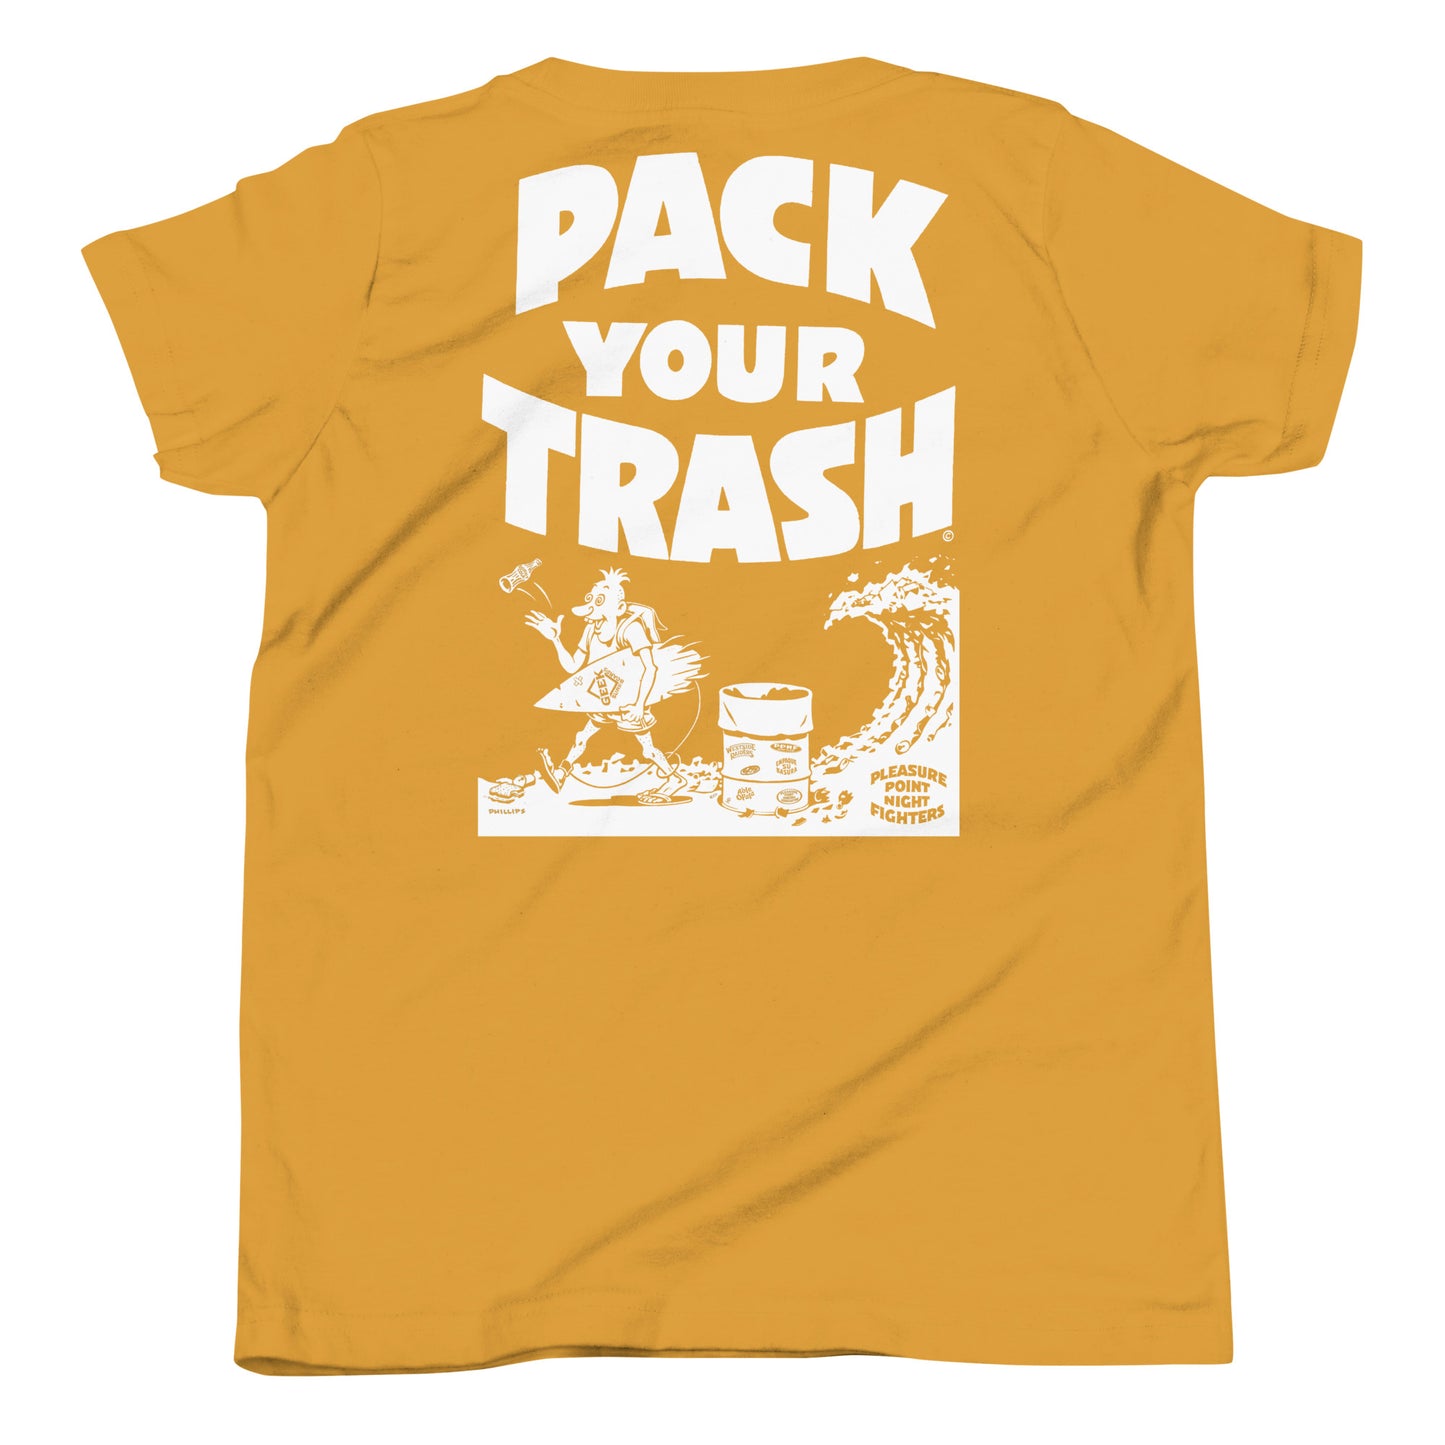 Pack Your Trash - Surfer Geek - Youth Short Sleeve T-Shirt